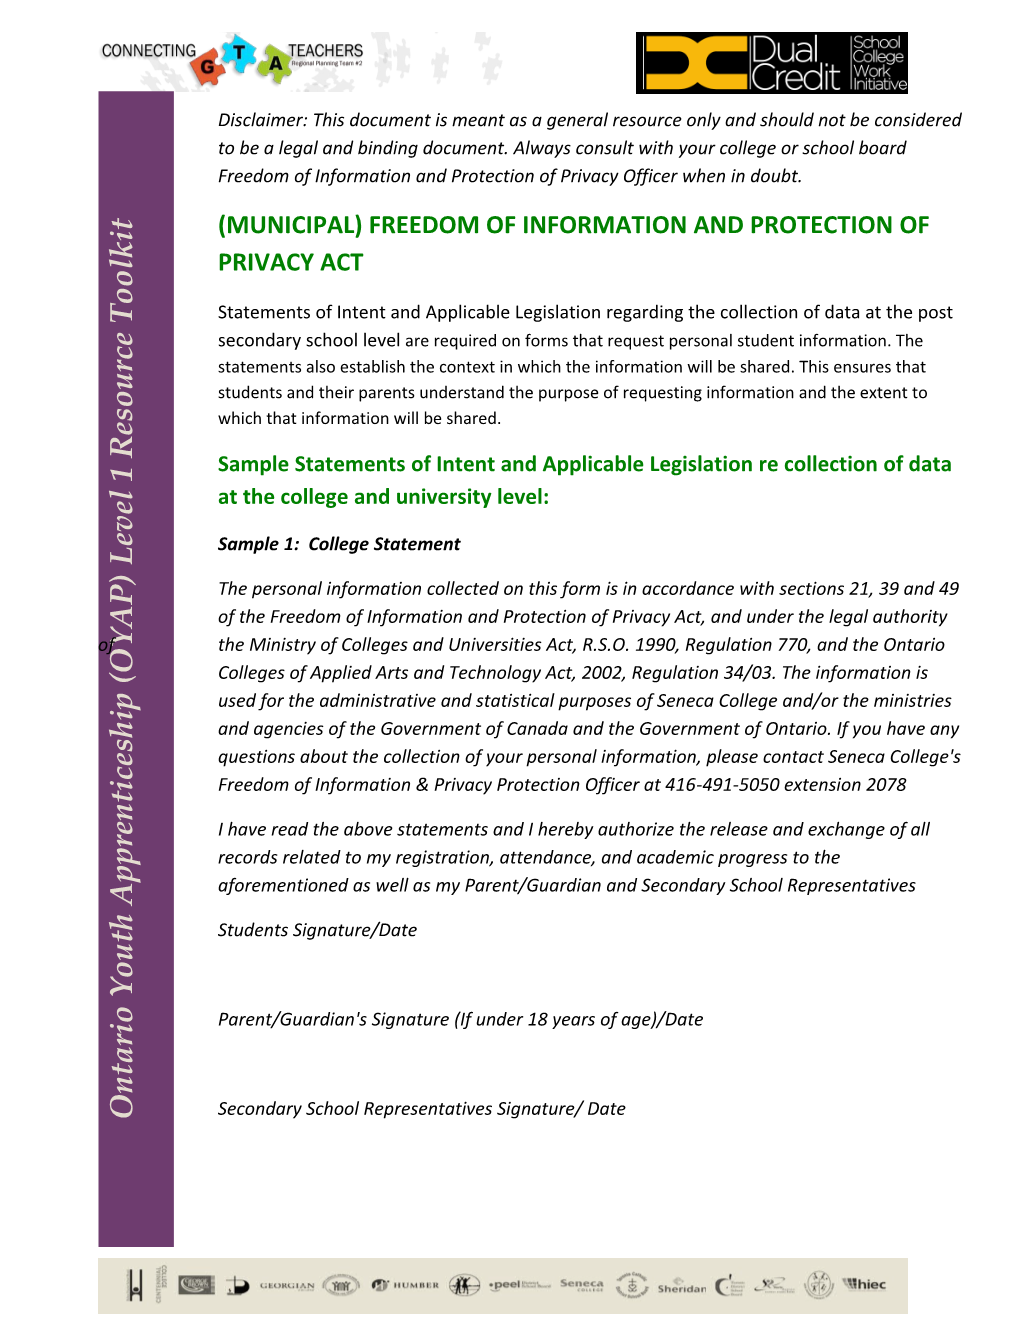 (Municipal) Freedom of Information and Protection of Privacy Act